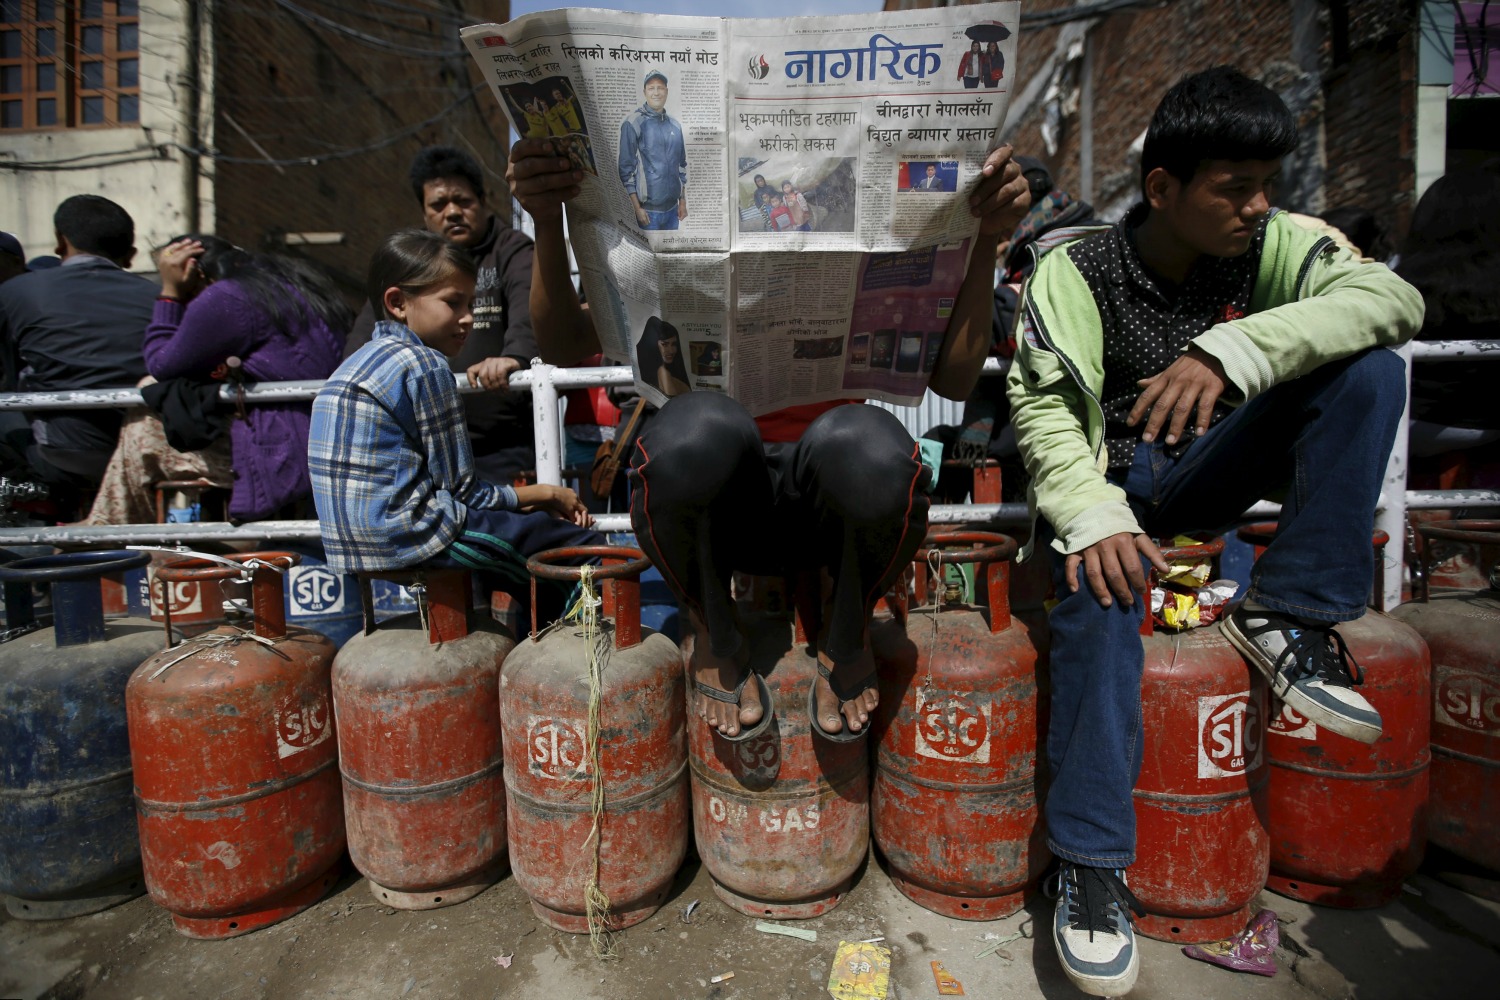 Nepal signs an agreement with China to solve its fuel crisis